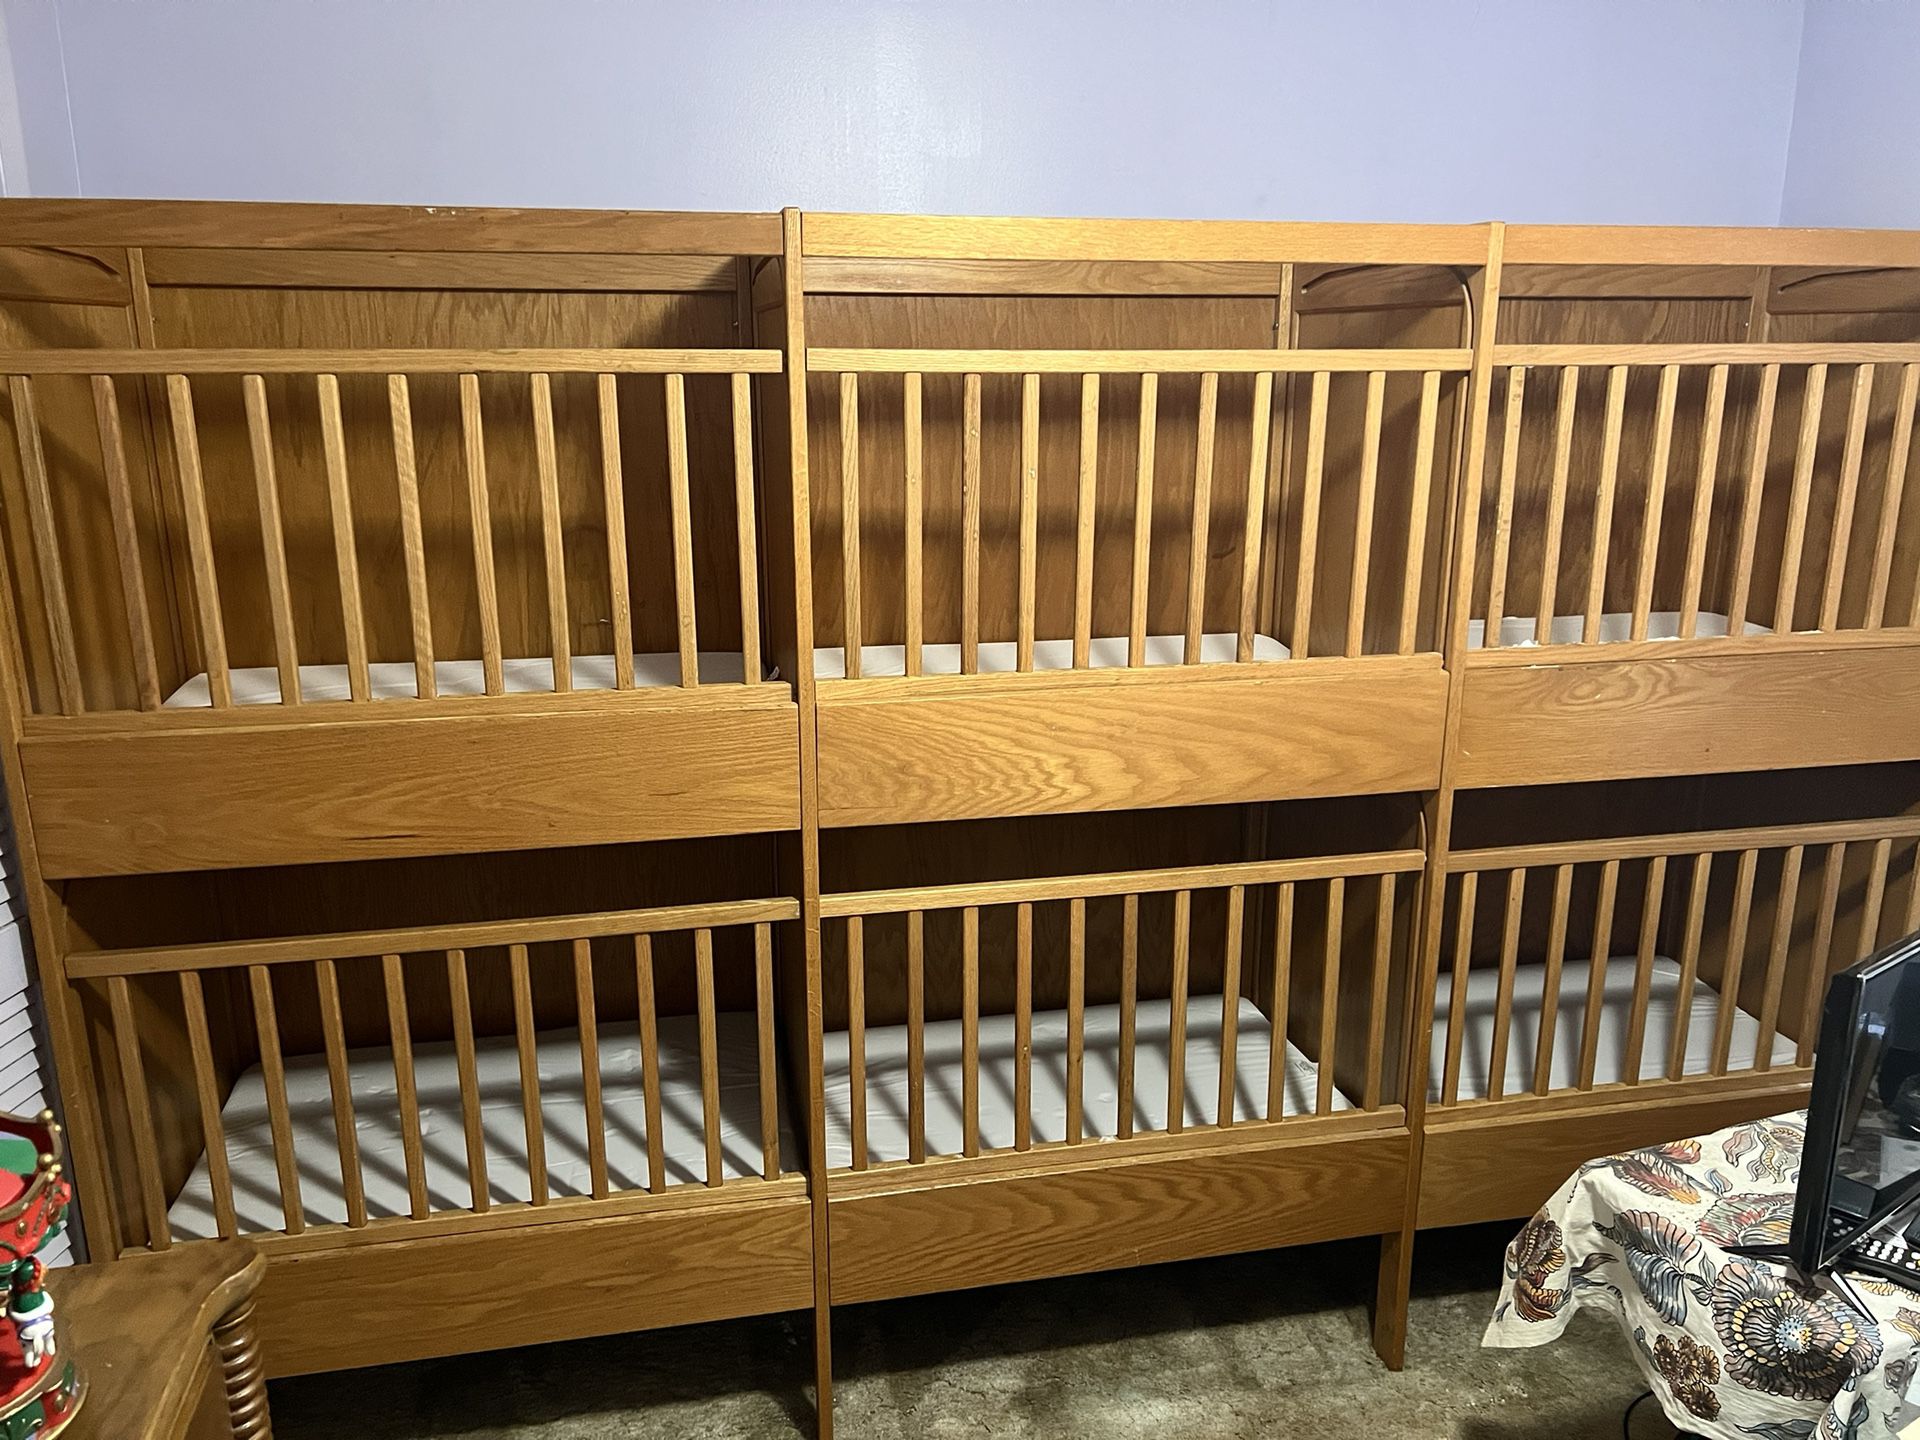 6 Stackable Bunk bed Cribs - Can Be Used For infants/pets